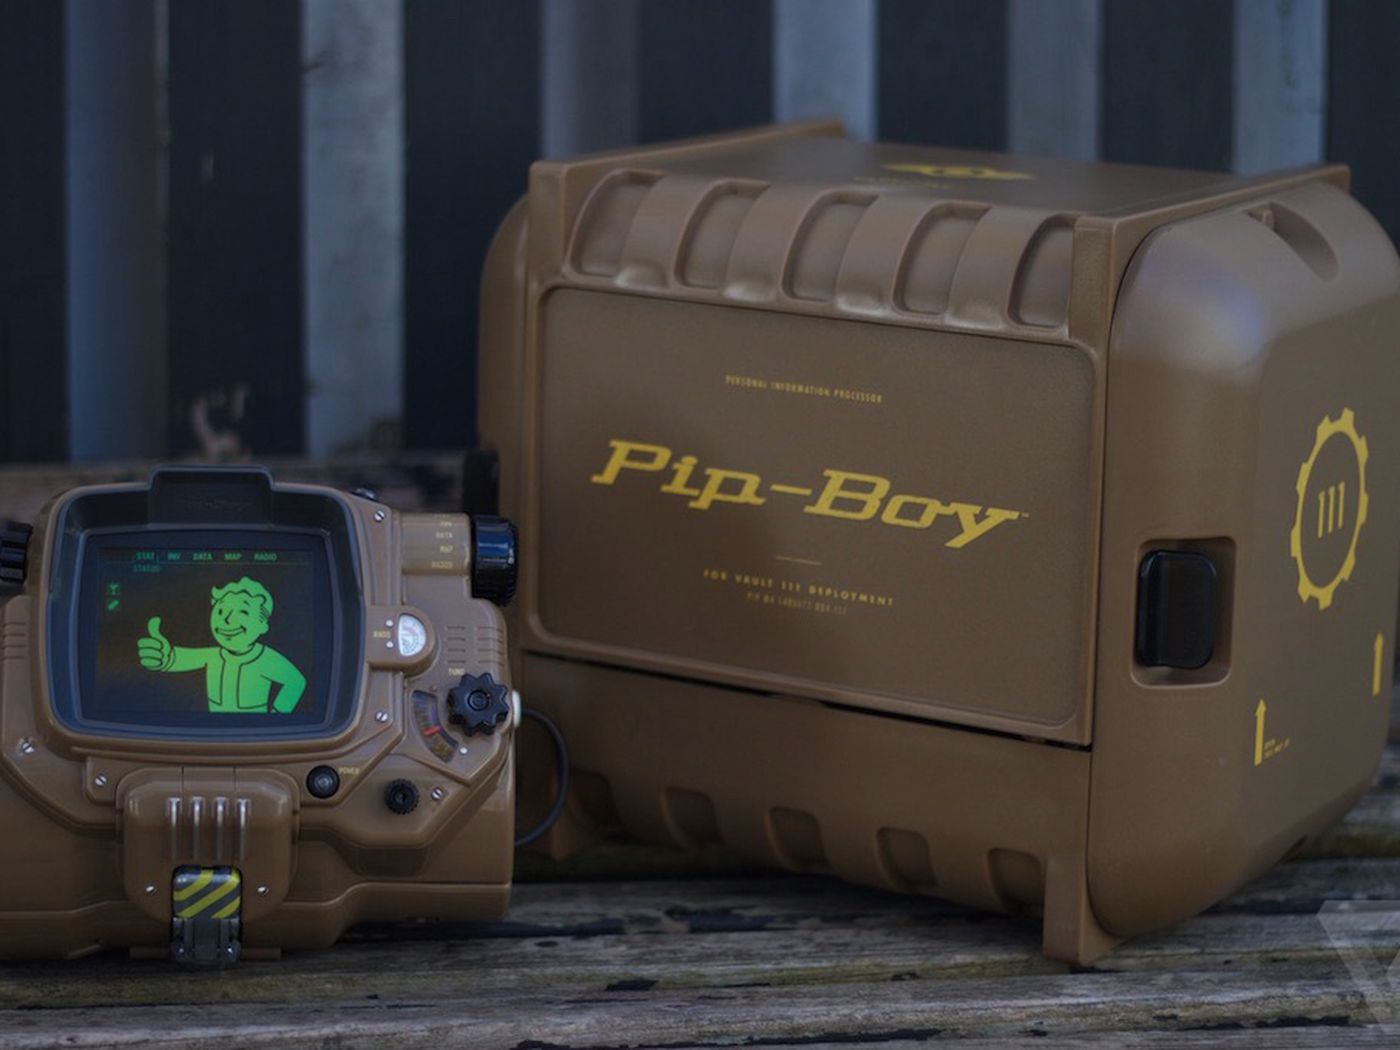 A closer look at the Fallout 4 Pip-Boy - The Verge